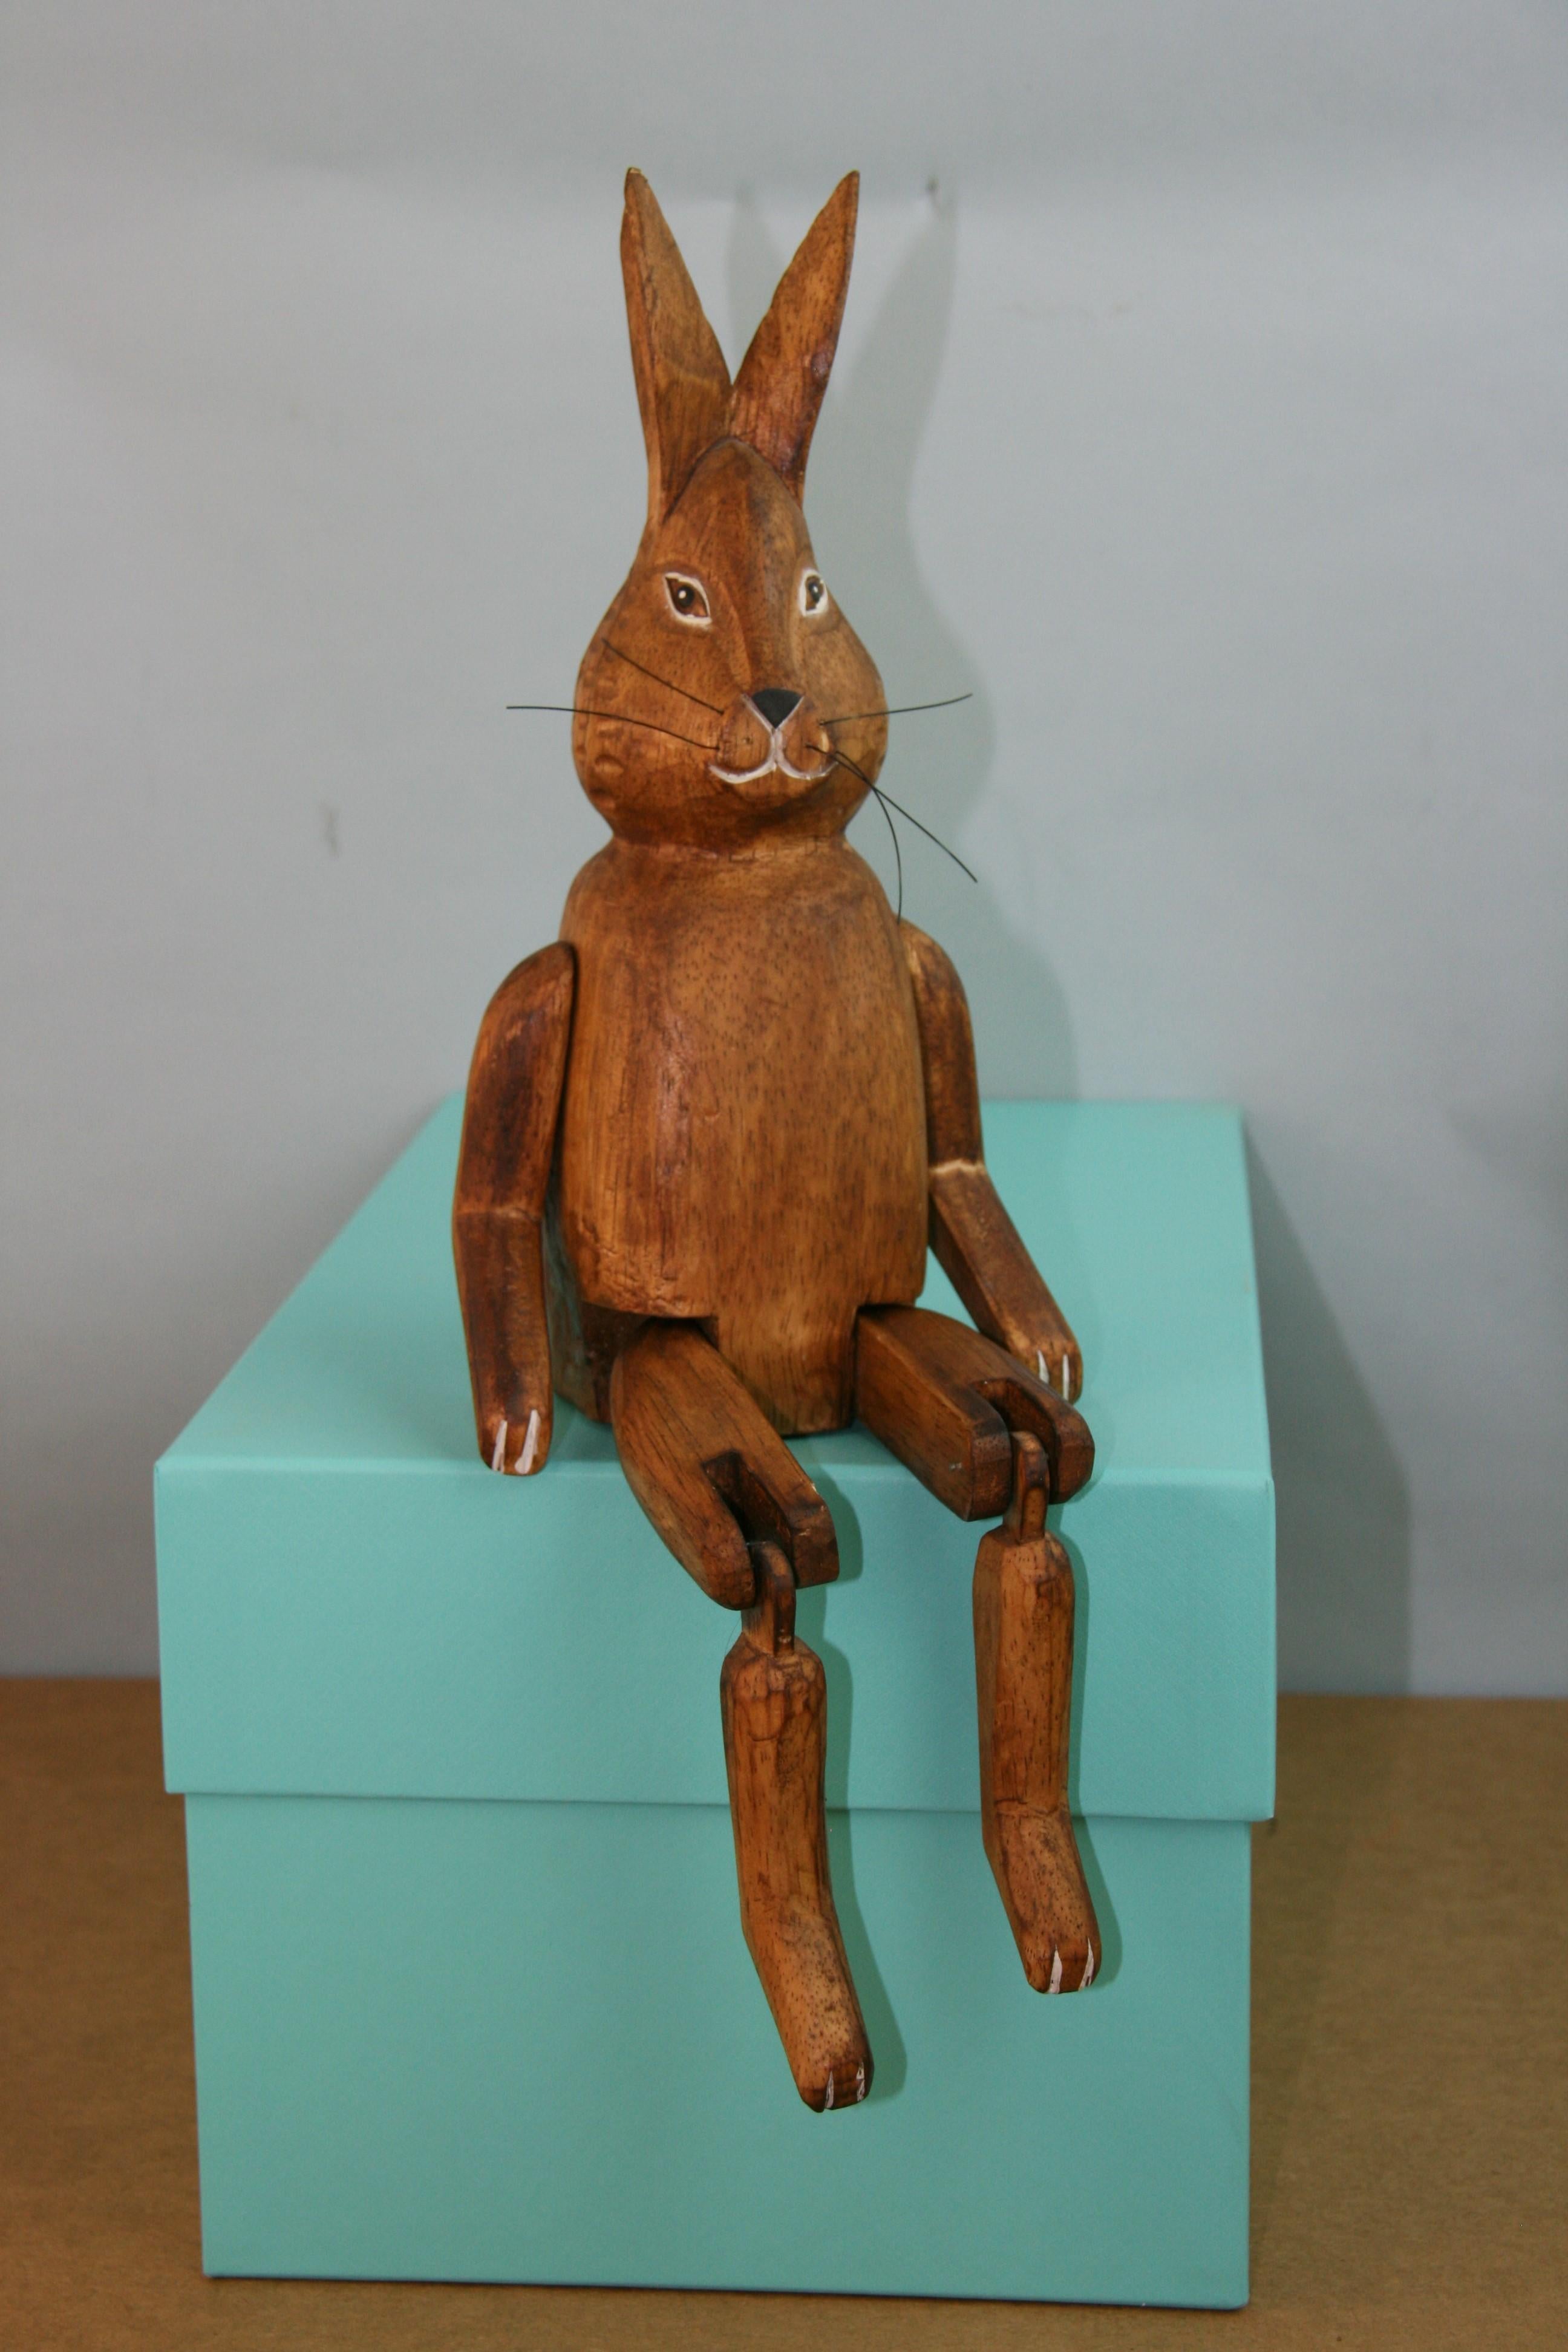 Japanese Folk Art articulating hand carved wood rabbit.
Made to sit on a shelf.
Movable arms and legs